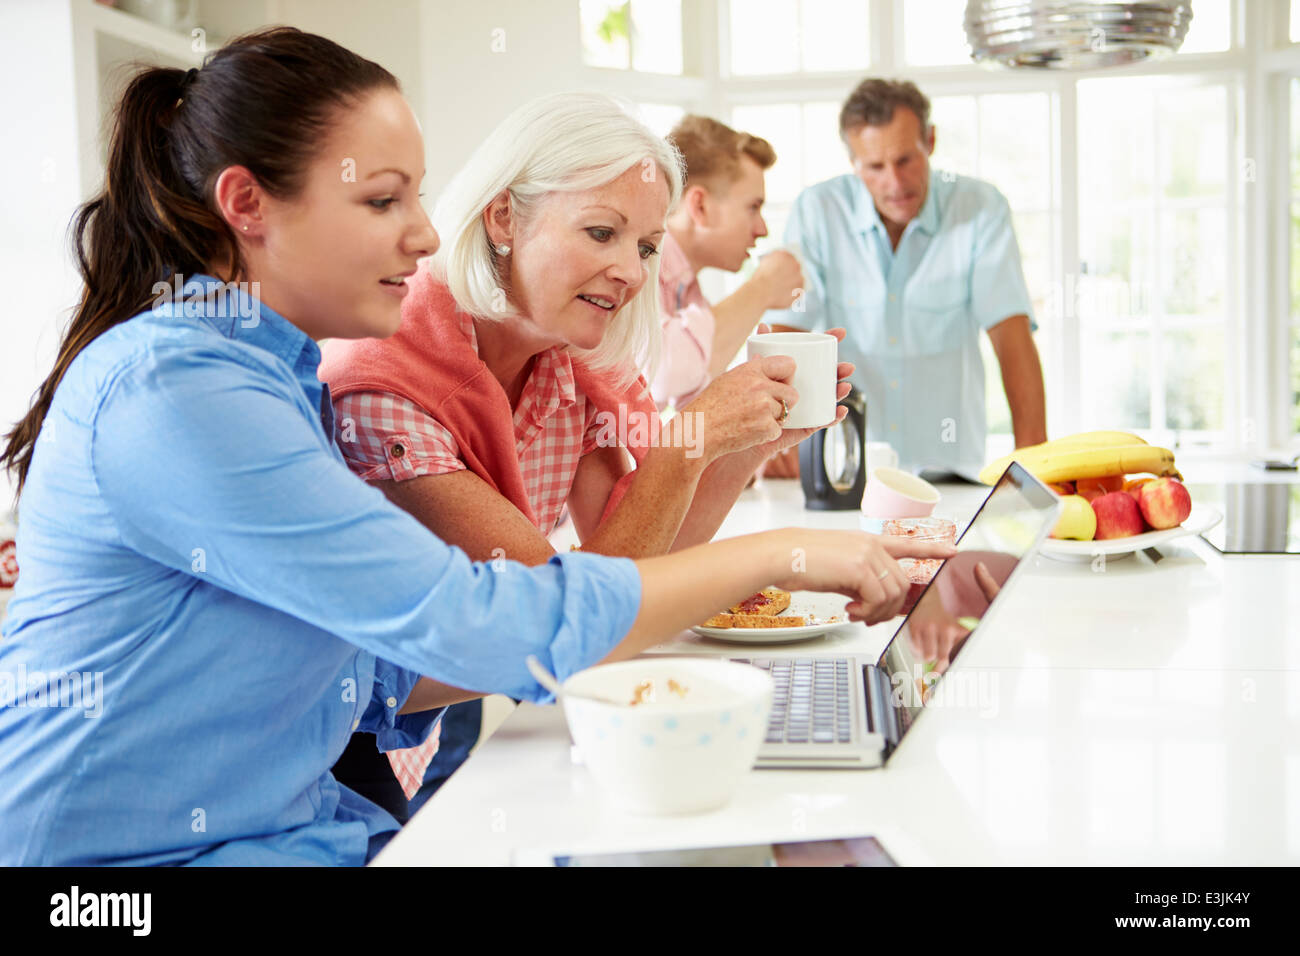 Family With Adult Children Having Breakfast Together Stock Photo